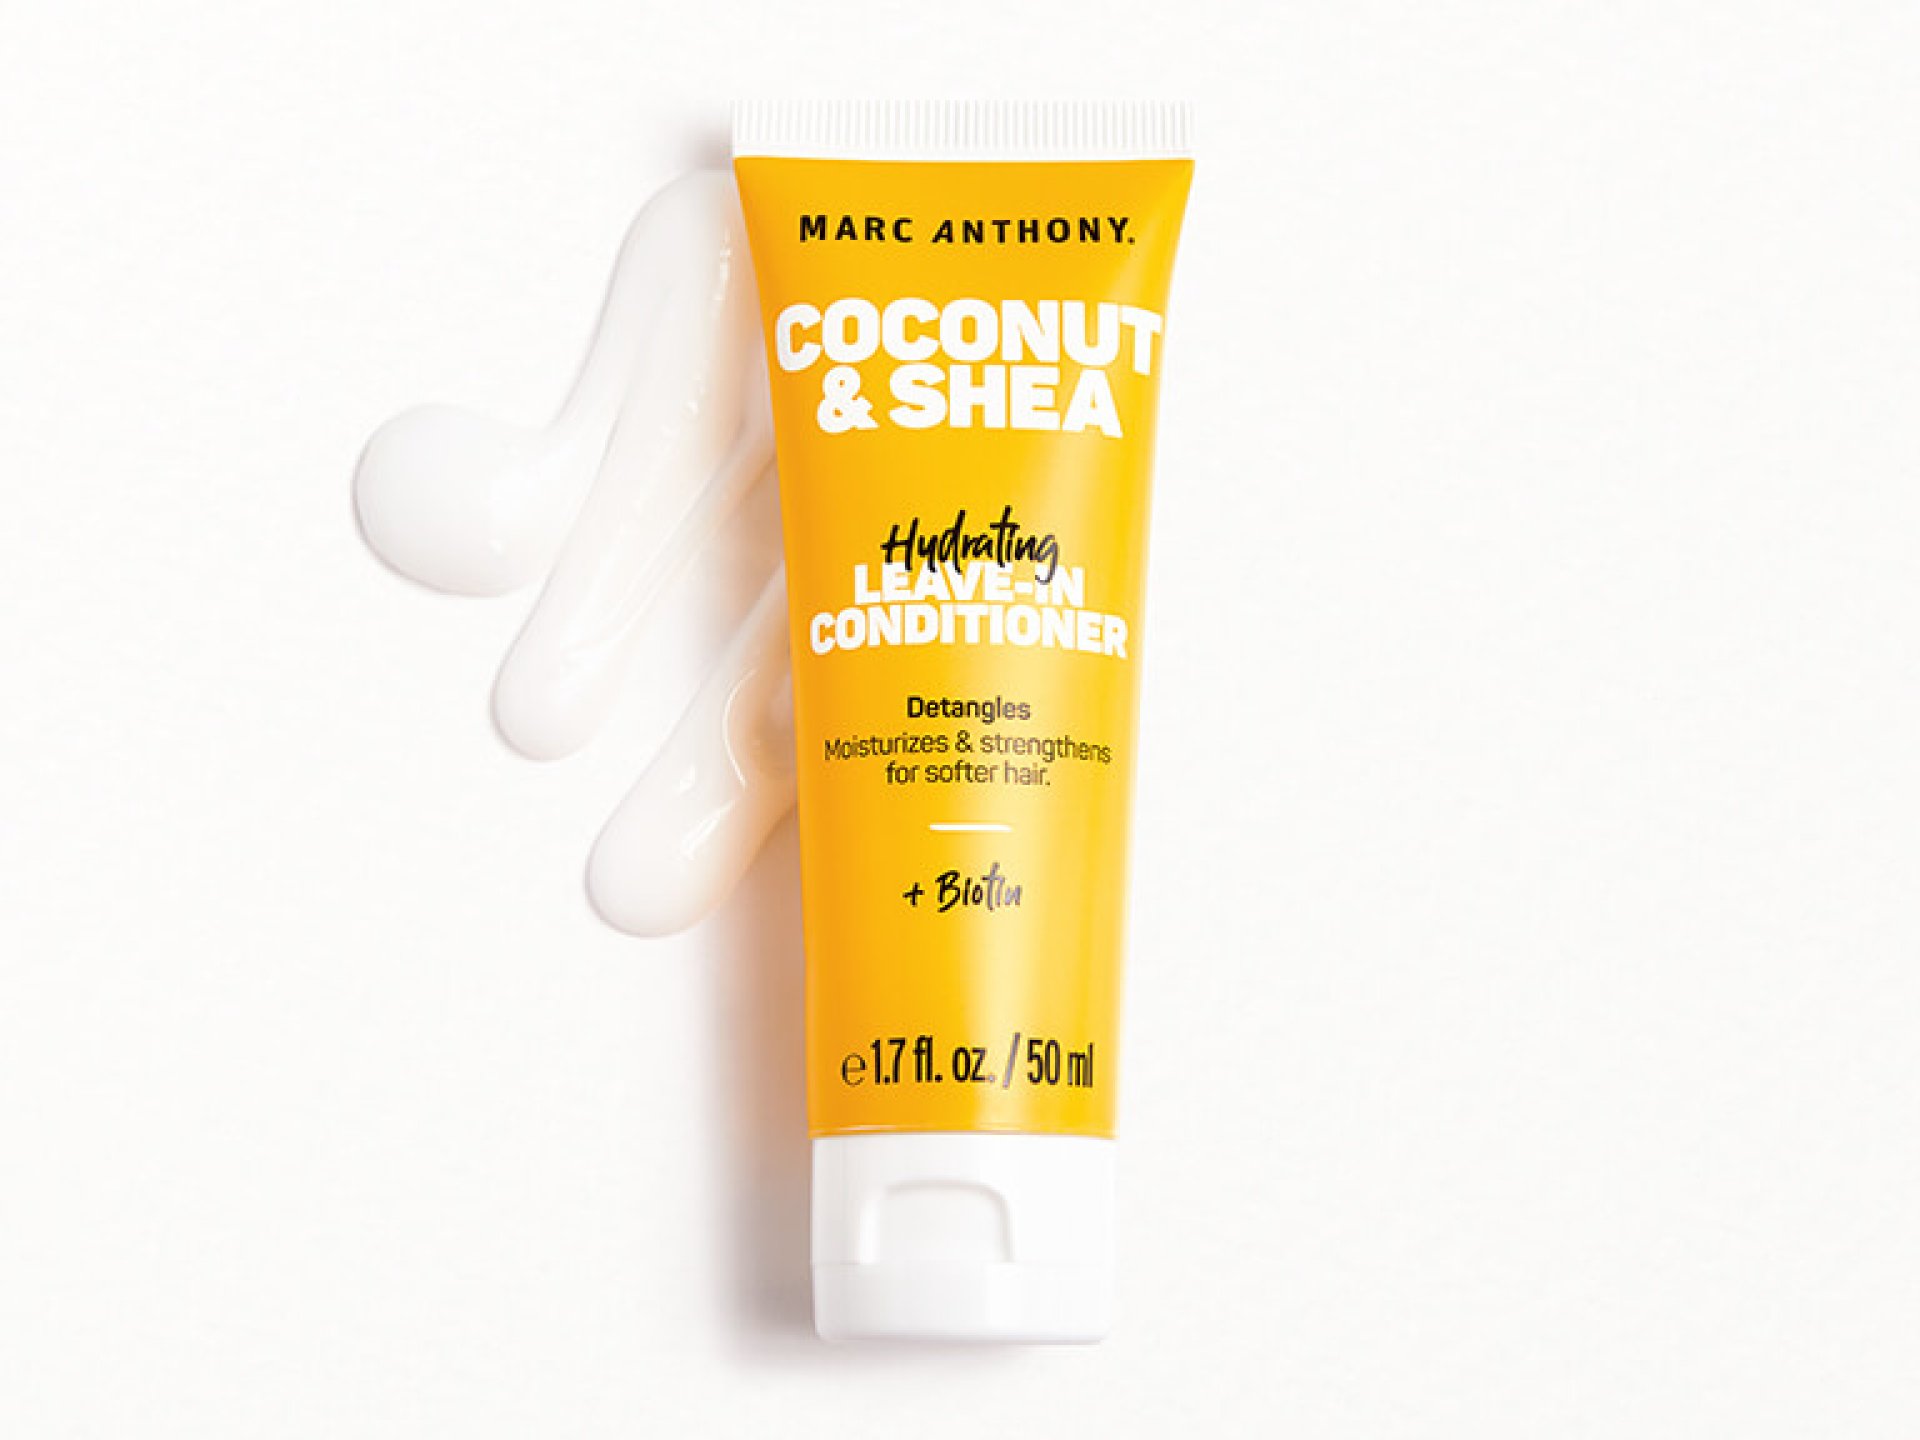 MARC ANTHONY Coconut & Shea Hydrating Leave-In Conditioner